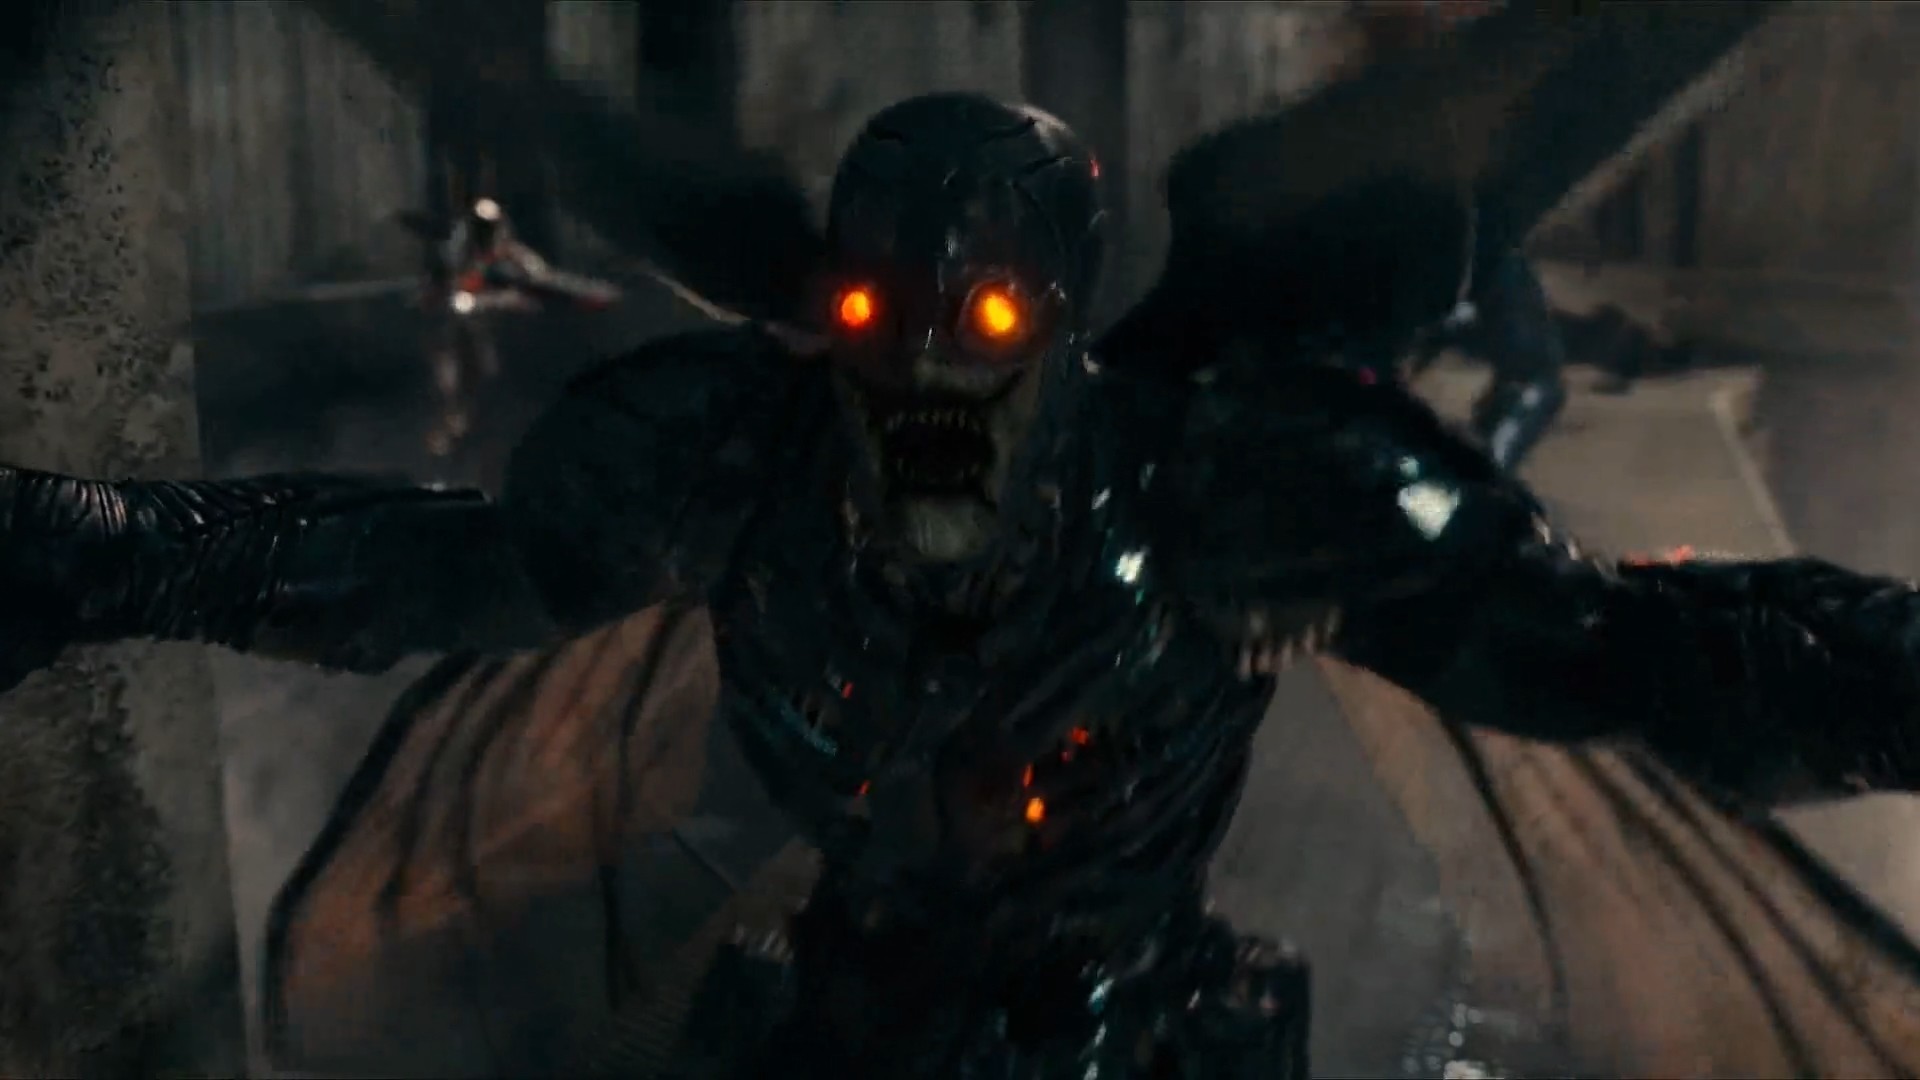 David Ayer Shares Concept For Parademons In Suicide Squad